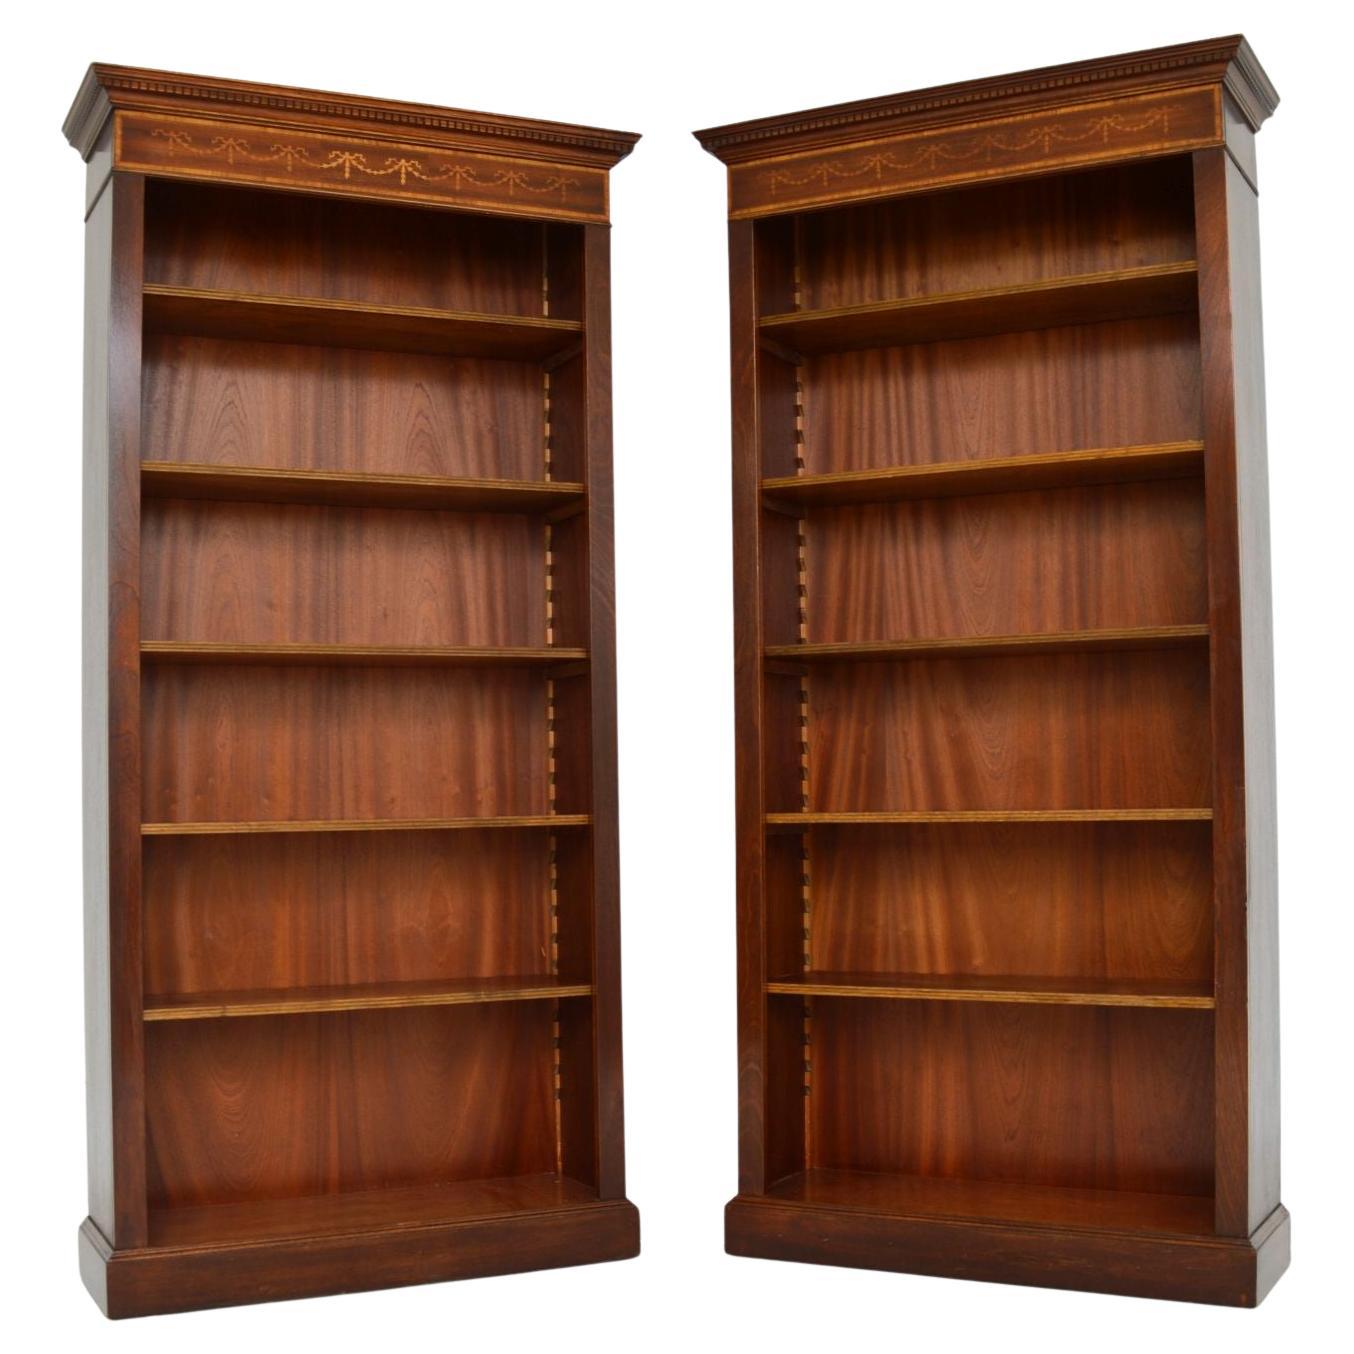 Pair of Antique Sheraton Style Open Bookcases